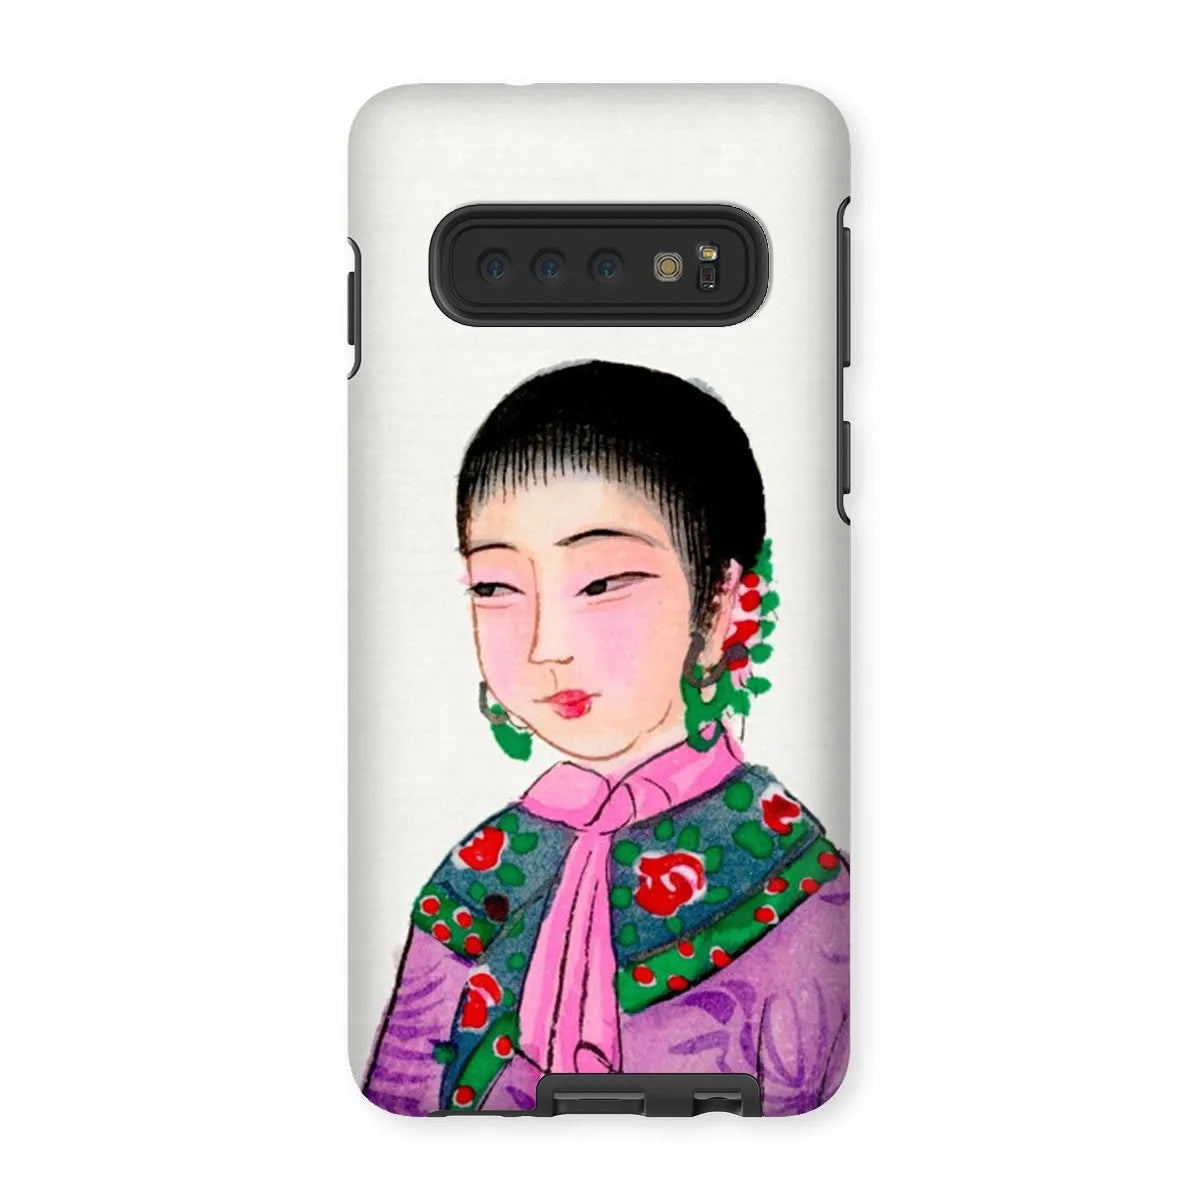 Manchu Noblewoman - Chinese Aesthetic Art Phone Case - Samsung Galaxy S10 / Matte - Mobile Phone Cases - Aesthetic Art